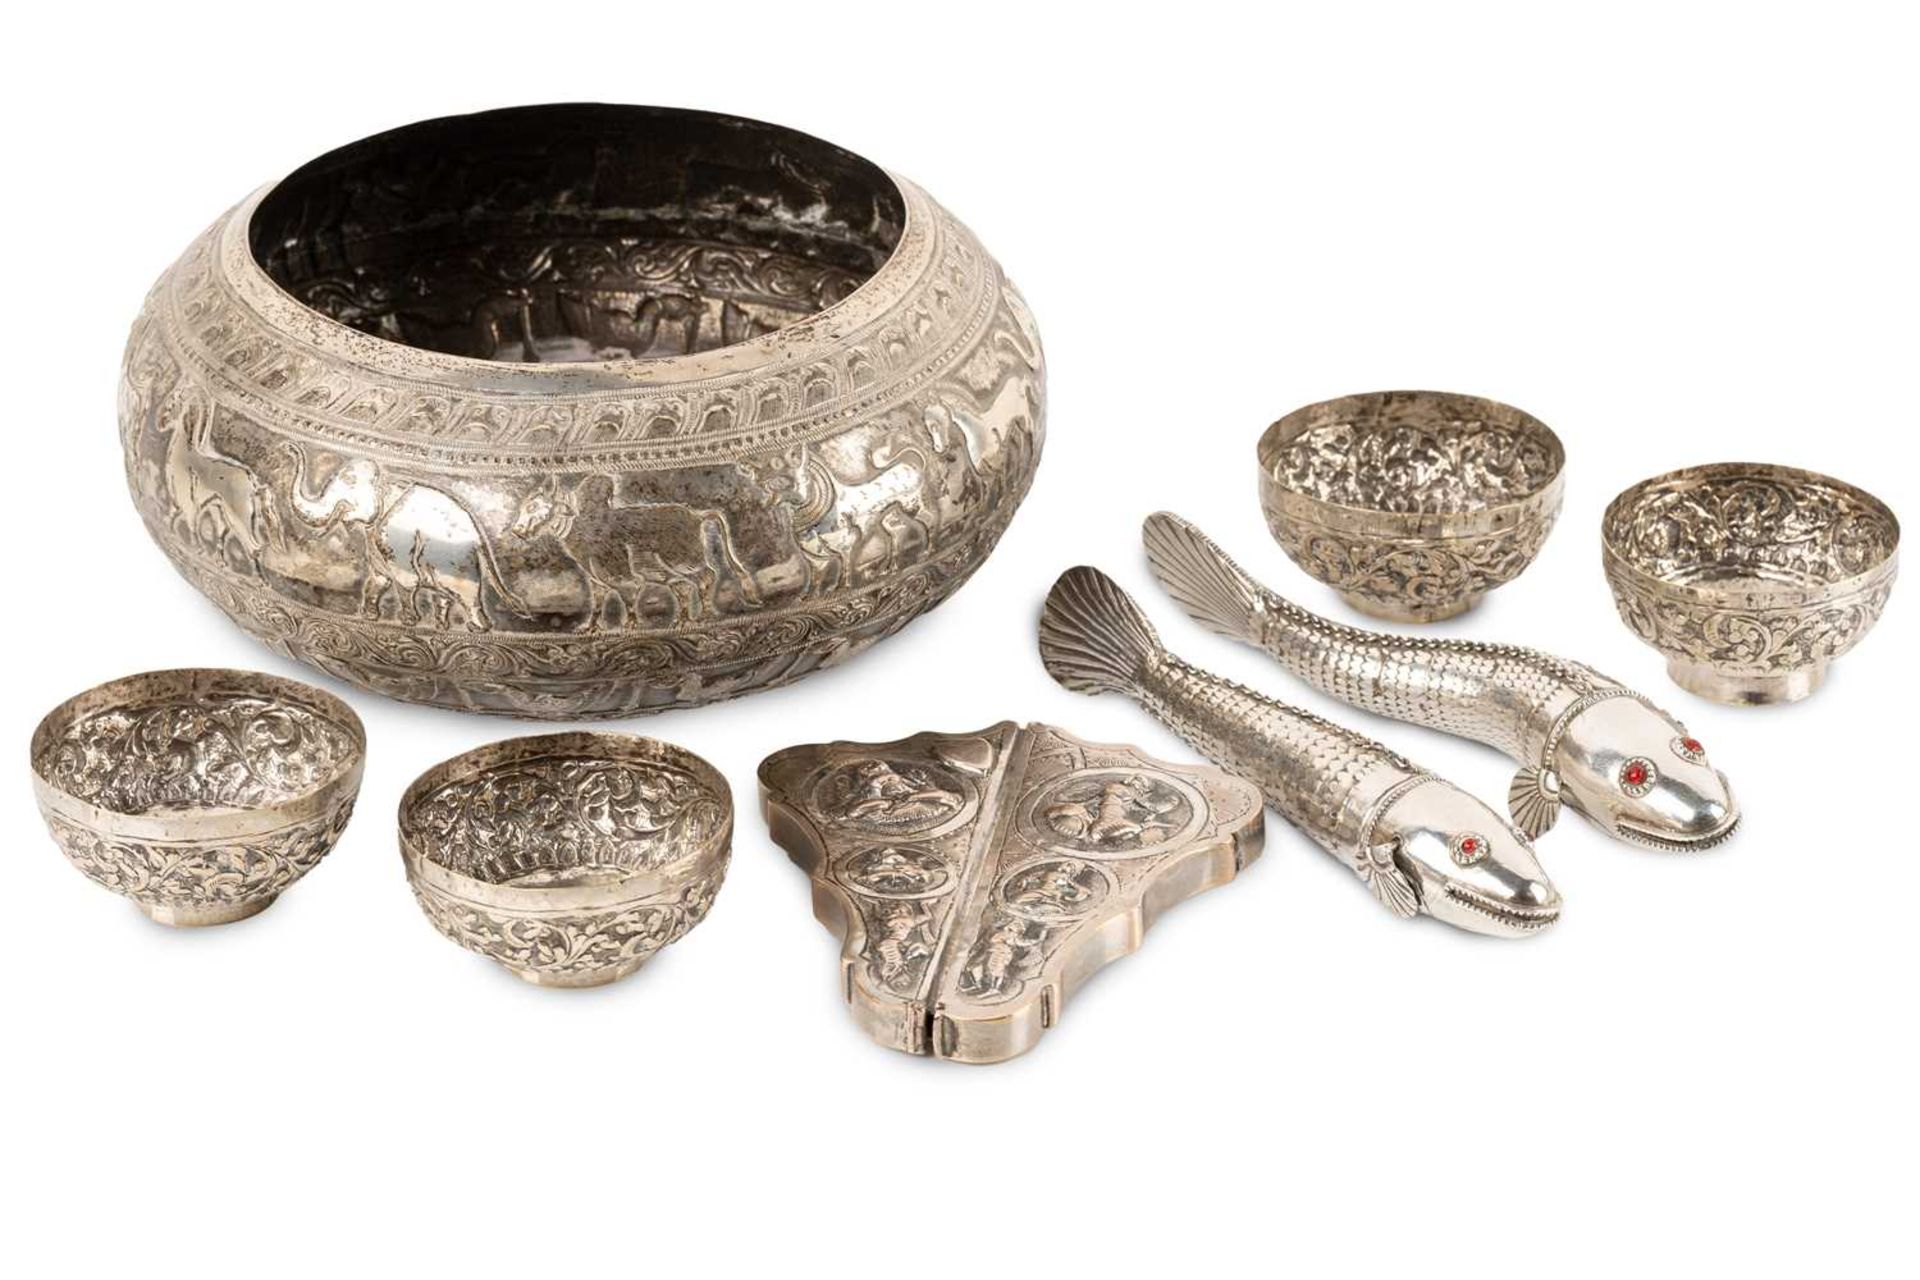 A Burmese white metal circular bowl with an inverted rim embossed with galleries of promenading